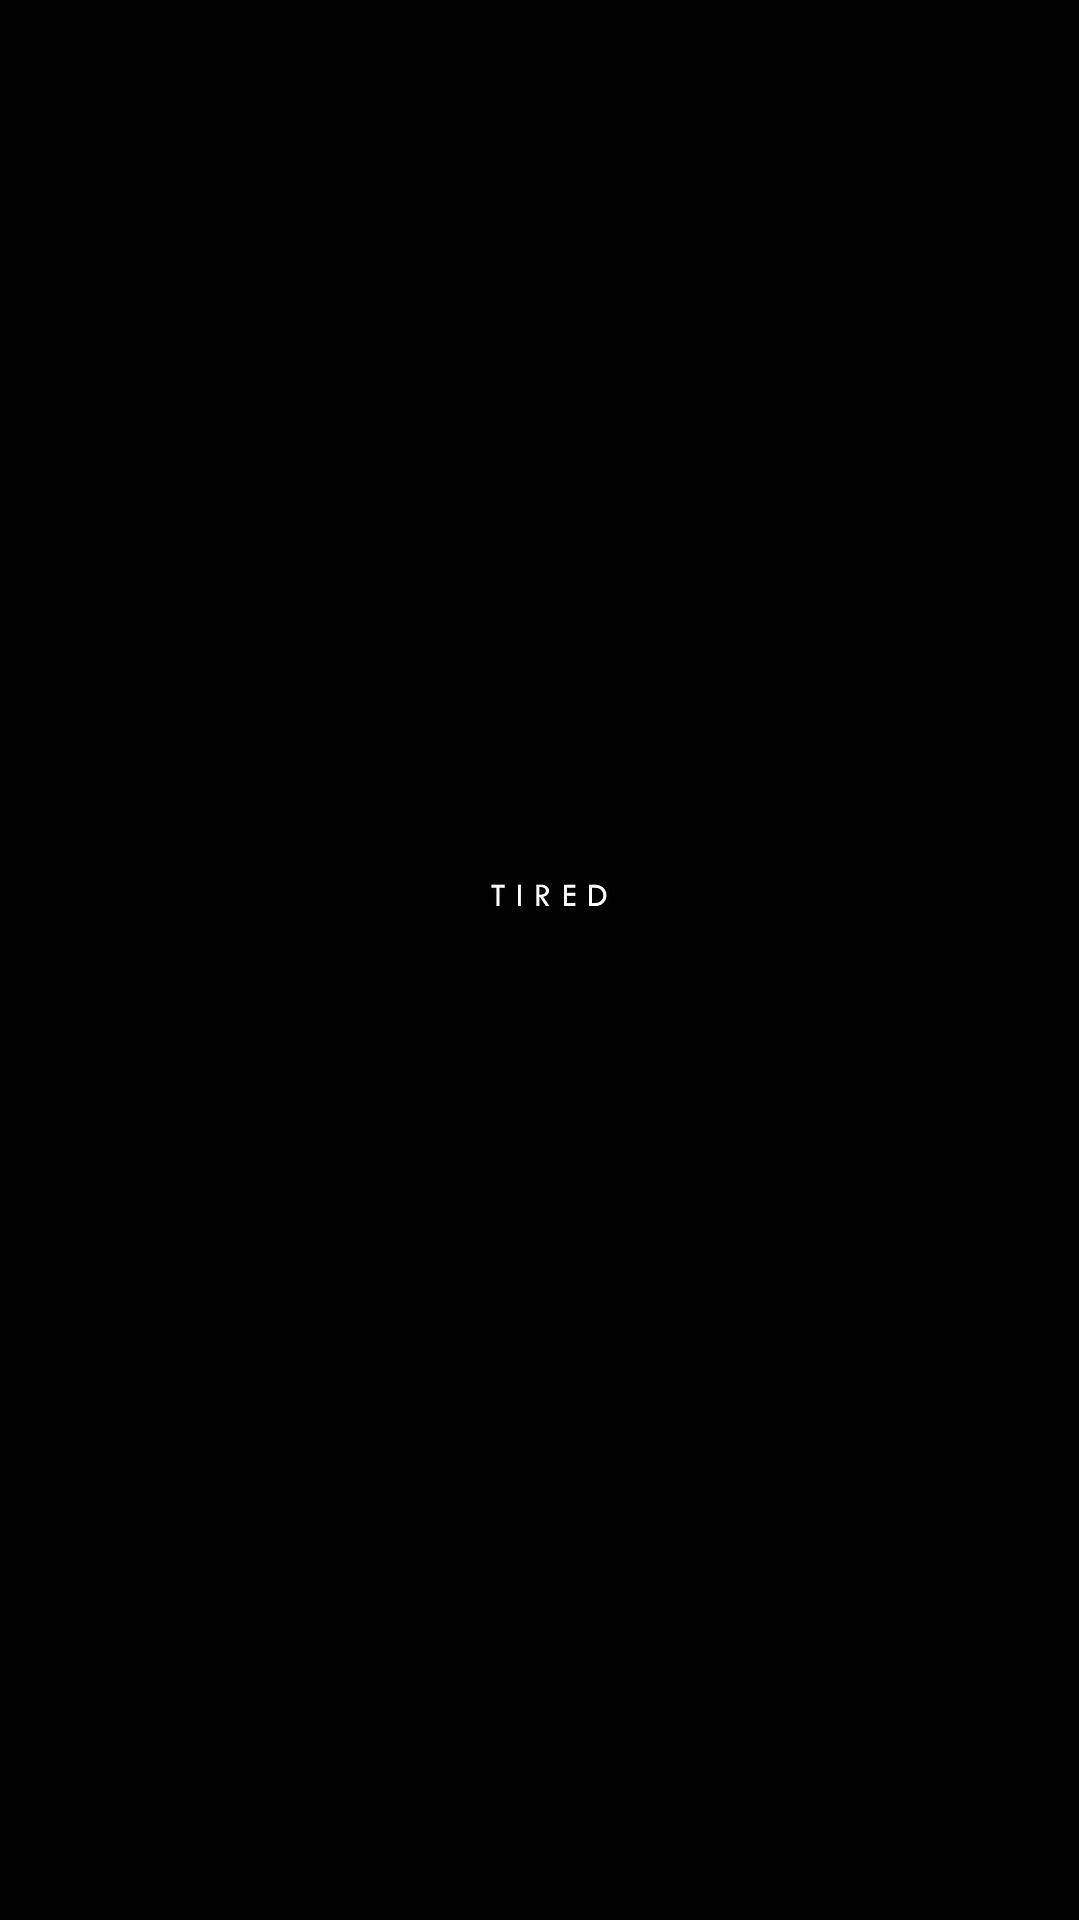 Simple Black Text Tired Background